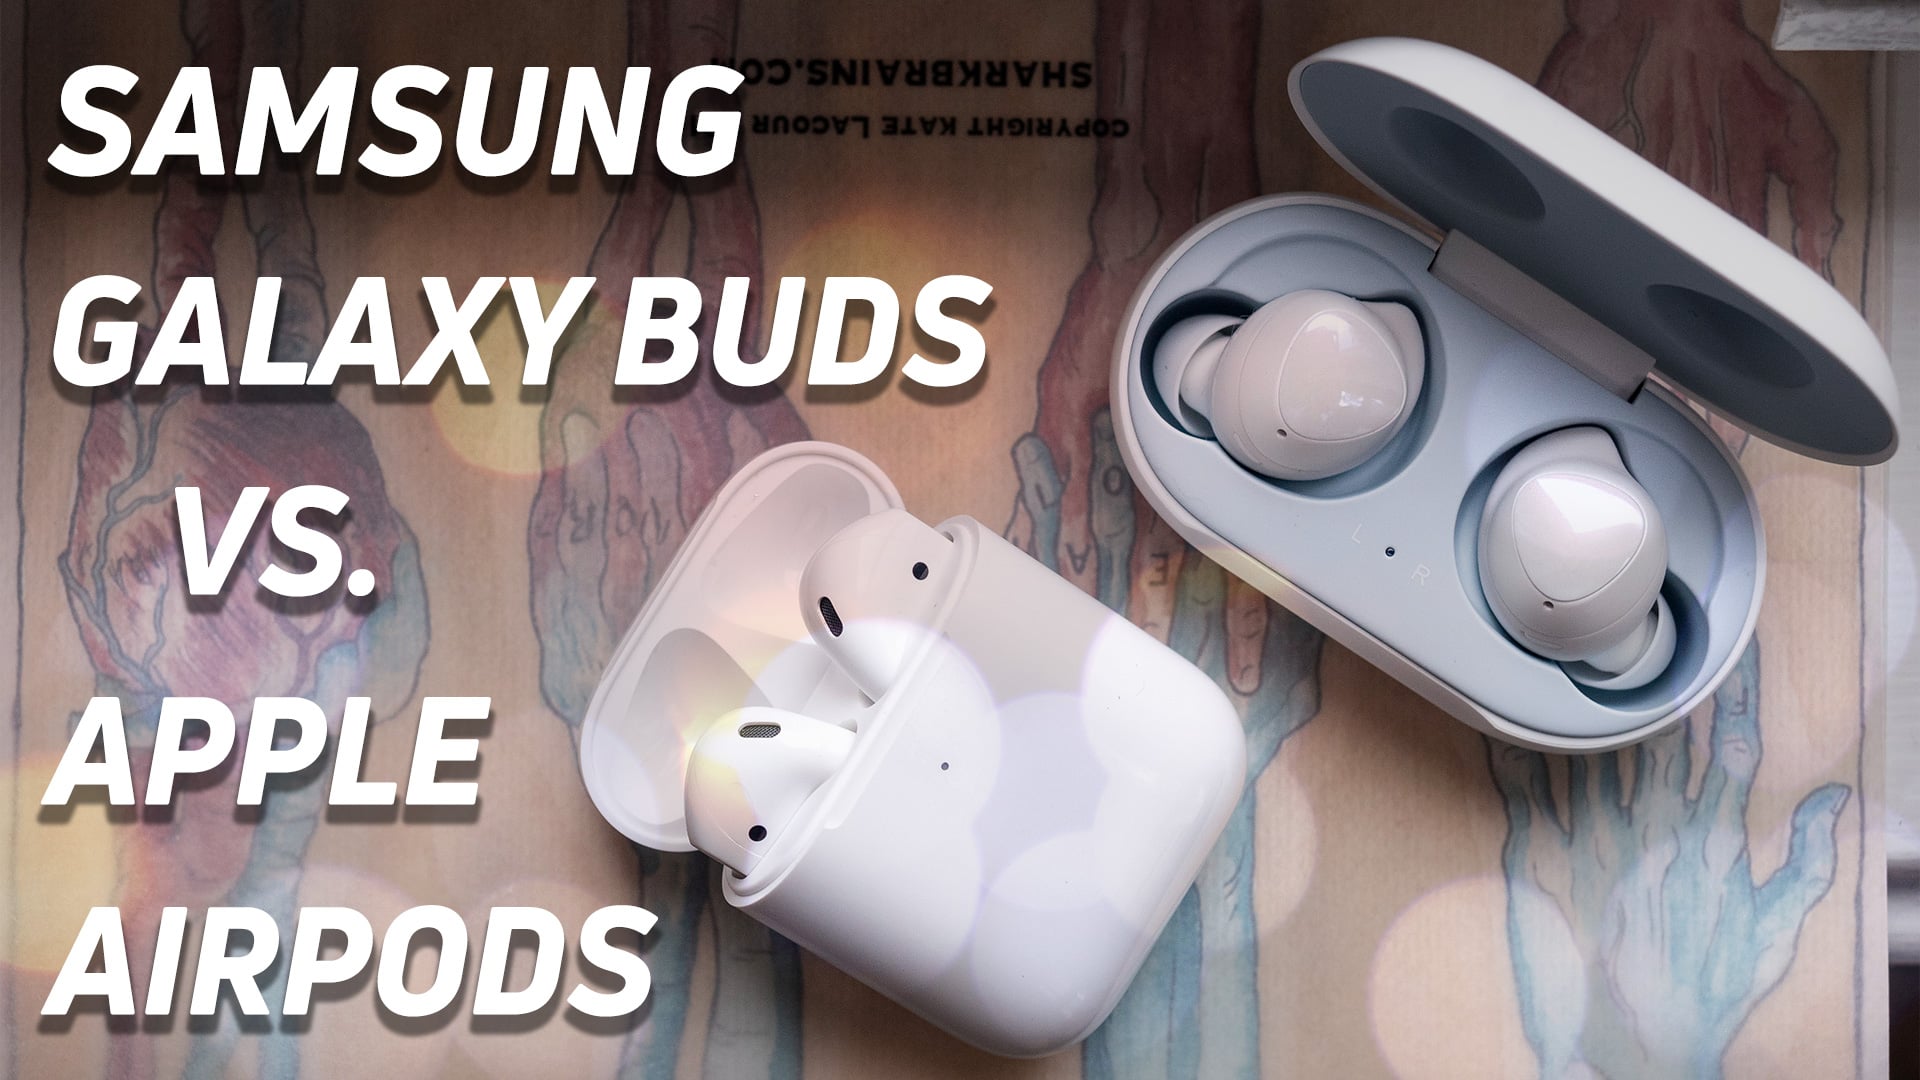 Samsung Galaxy Buds vs Apple AirPods Android